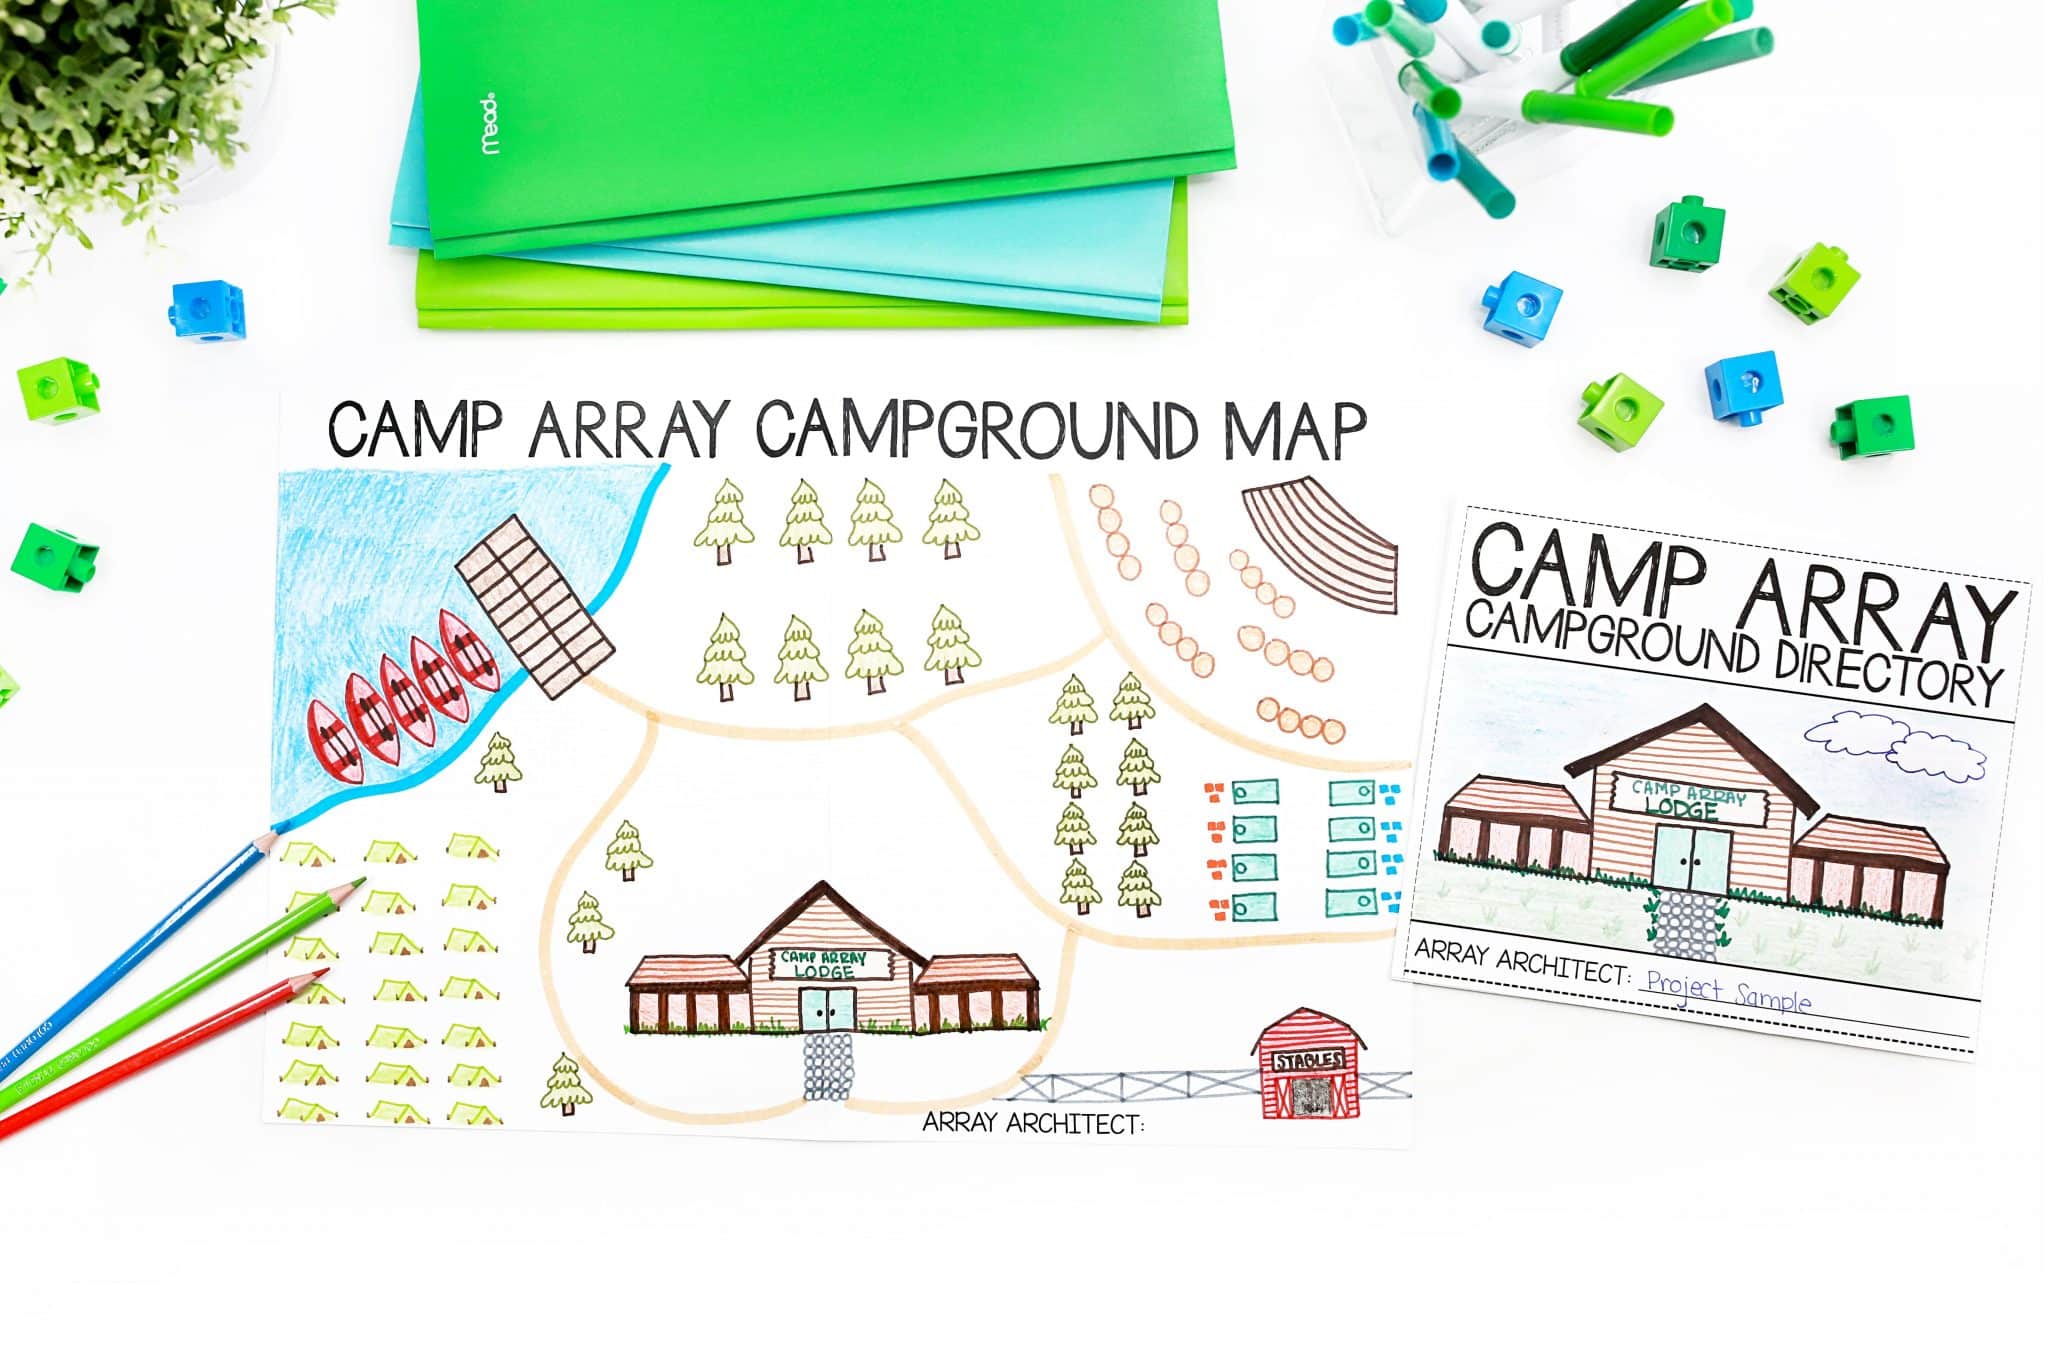 Multiplication math project sample showing a camping-themed map of arrays laying next to a booklet that shows all the mathematical thinking connected to the map.